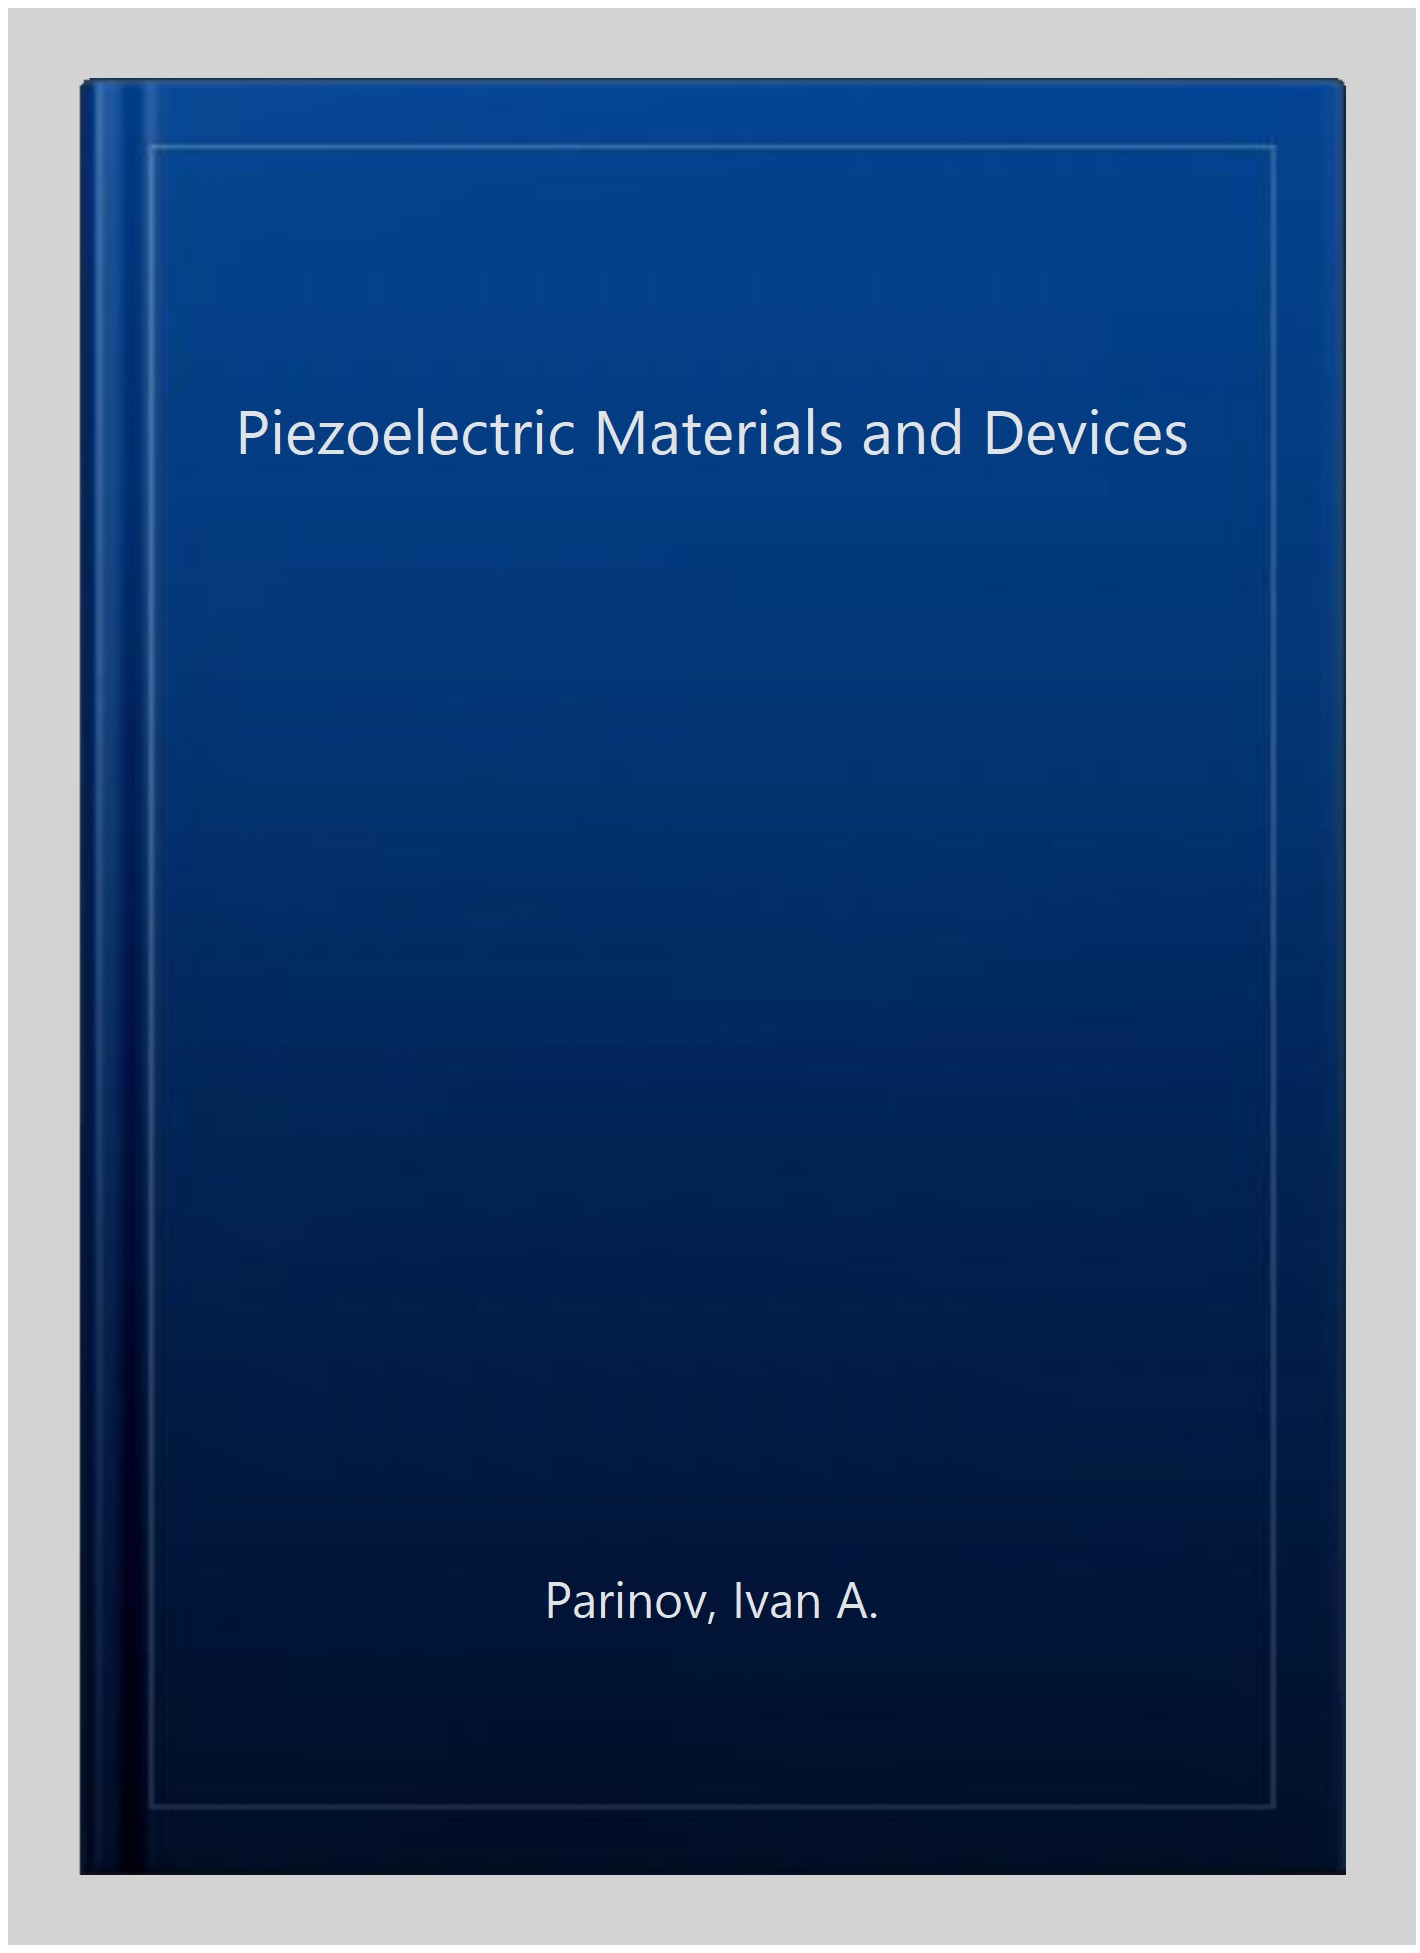 Piezoelectric Materials and Devices - Parinov, Ivan A.